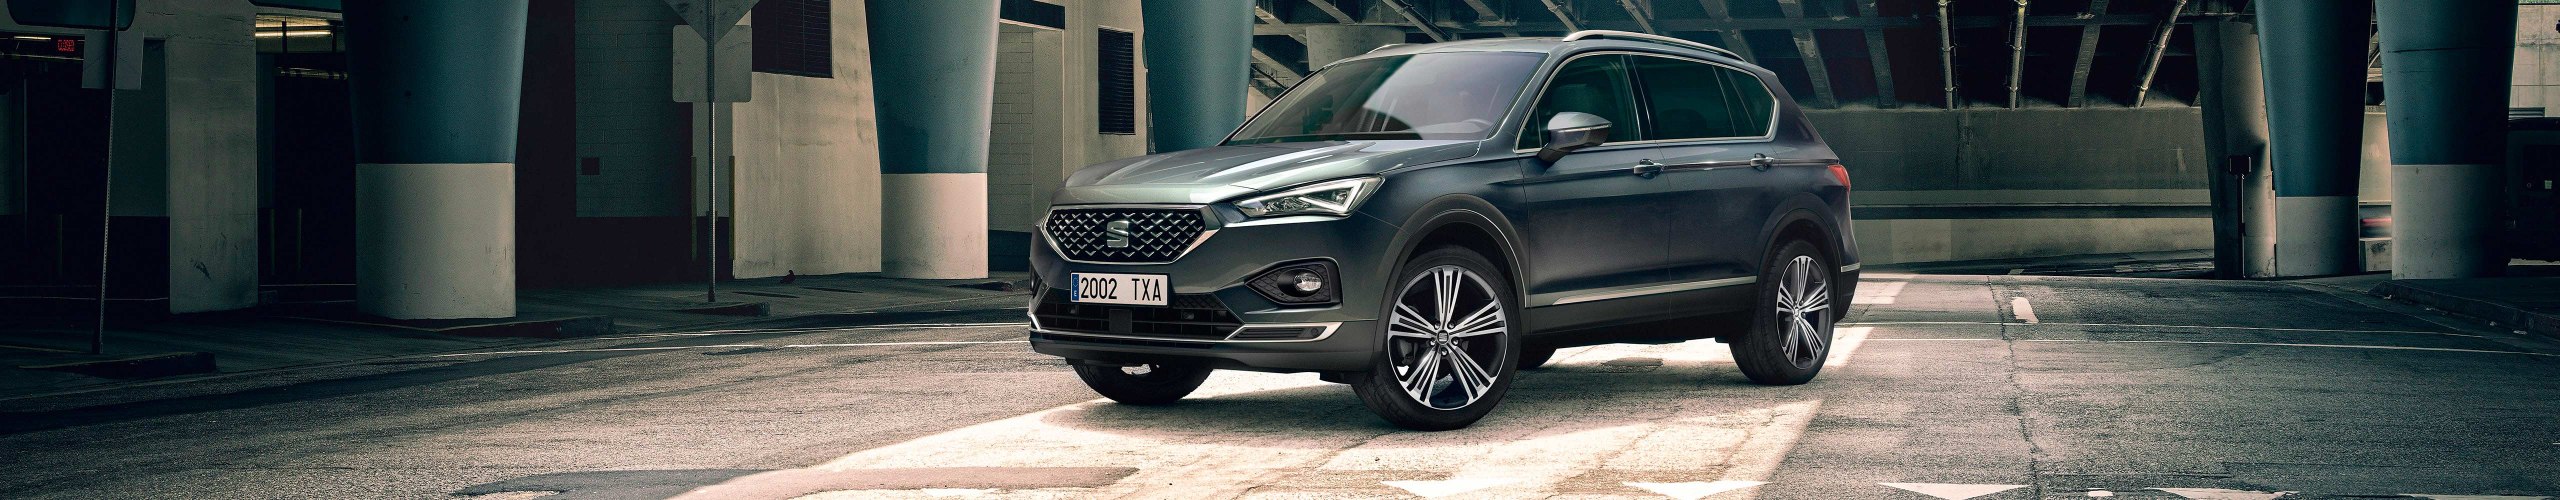 New SEAT Tarraco SUV 7 seater parked outside building beauty shot